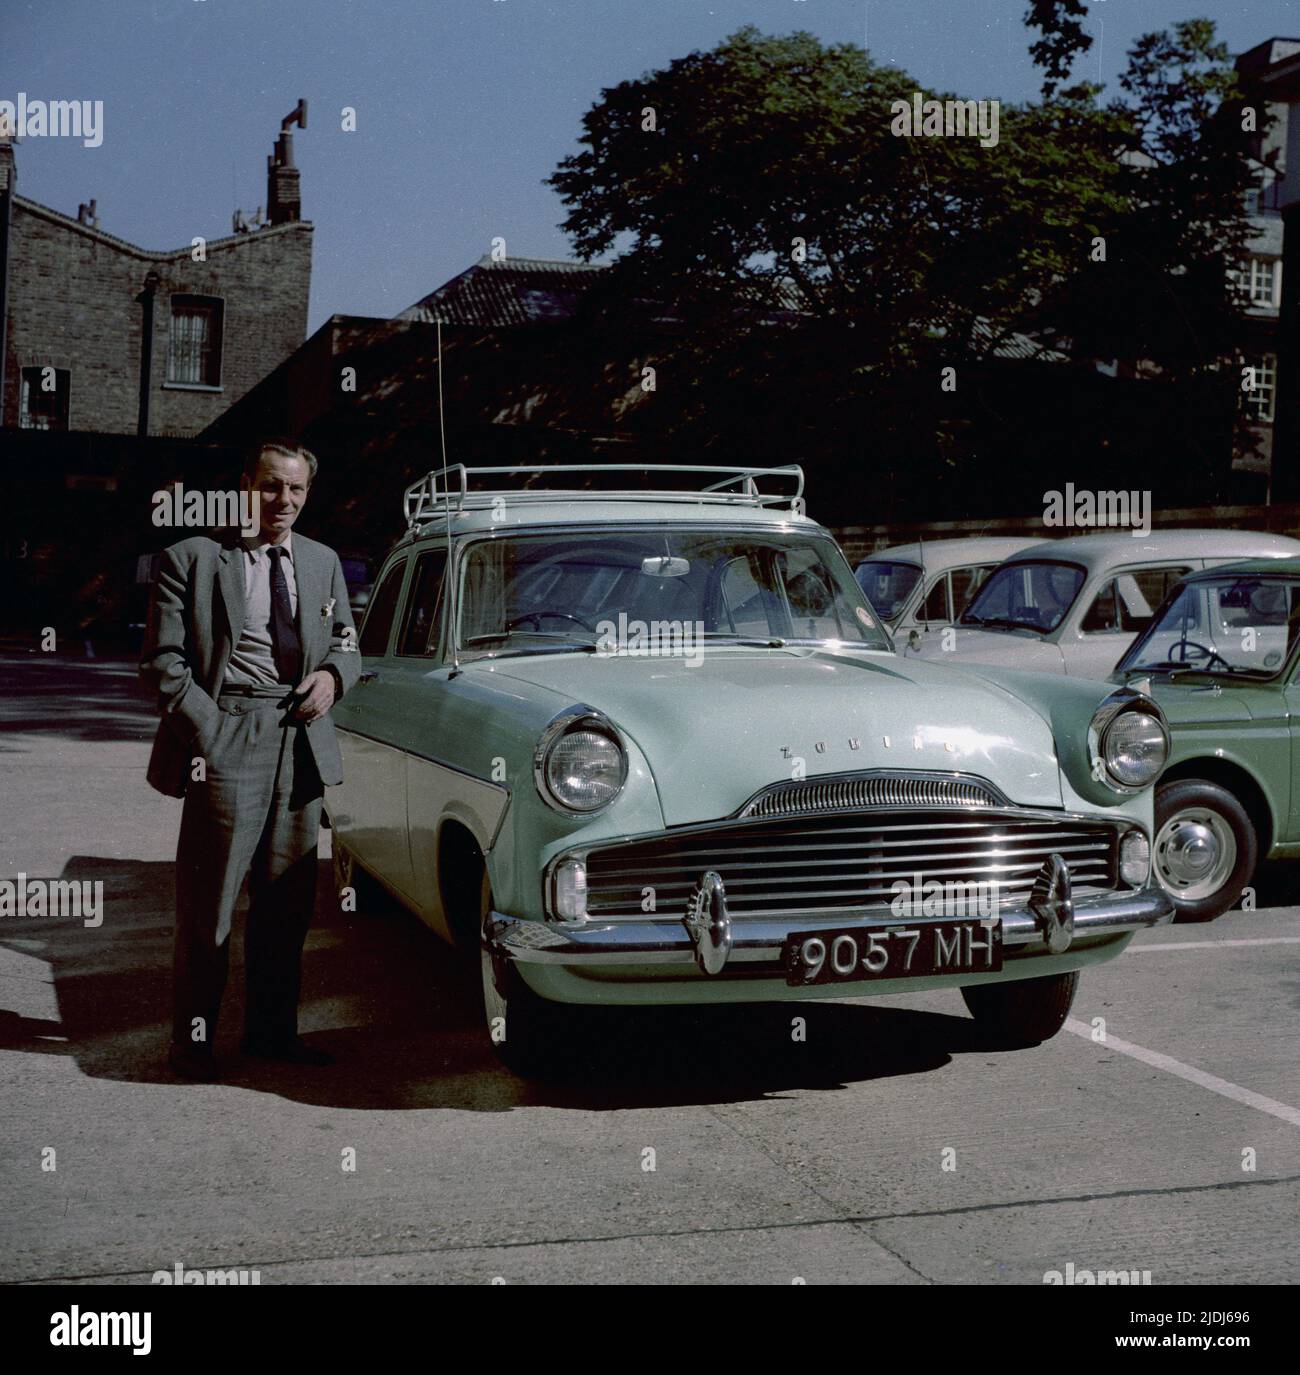 1964, historical, a gentleman in a suit & tie, standing in a car park by his motorcar of the era, a tone-tone, British Ford Zodiac, England, UK. Stock Photo